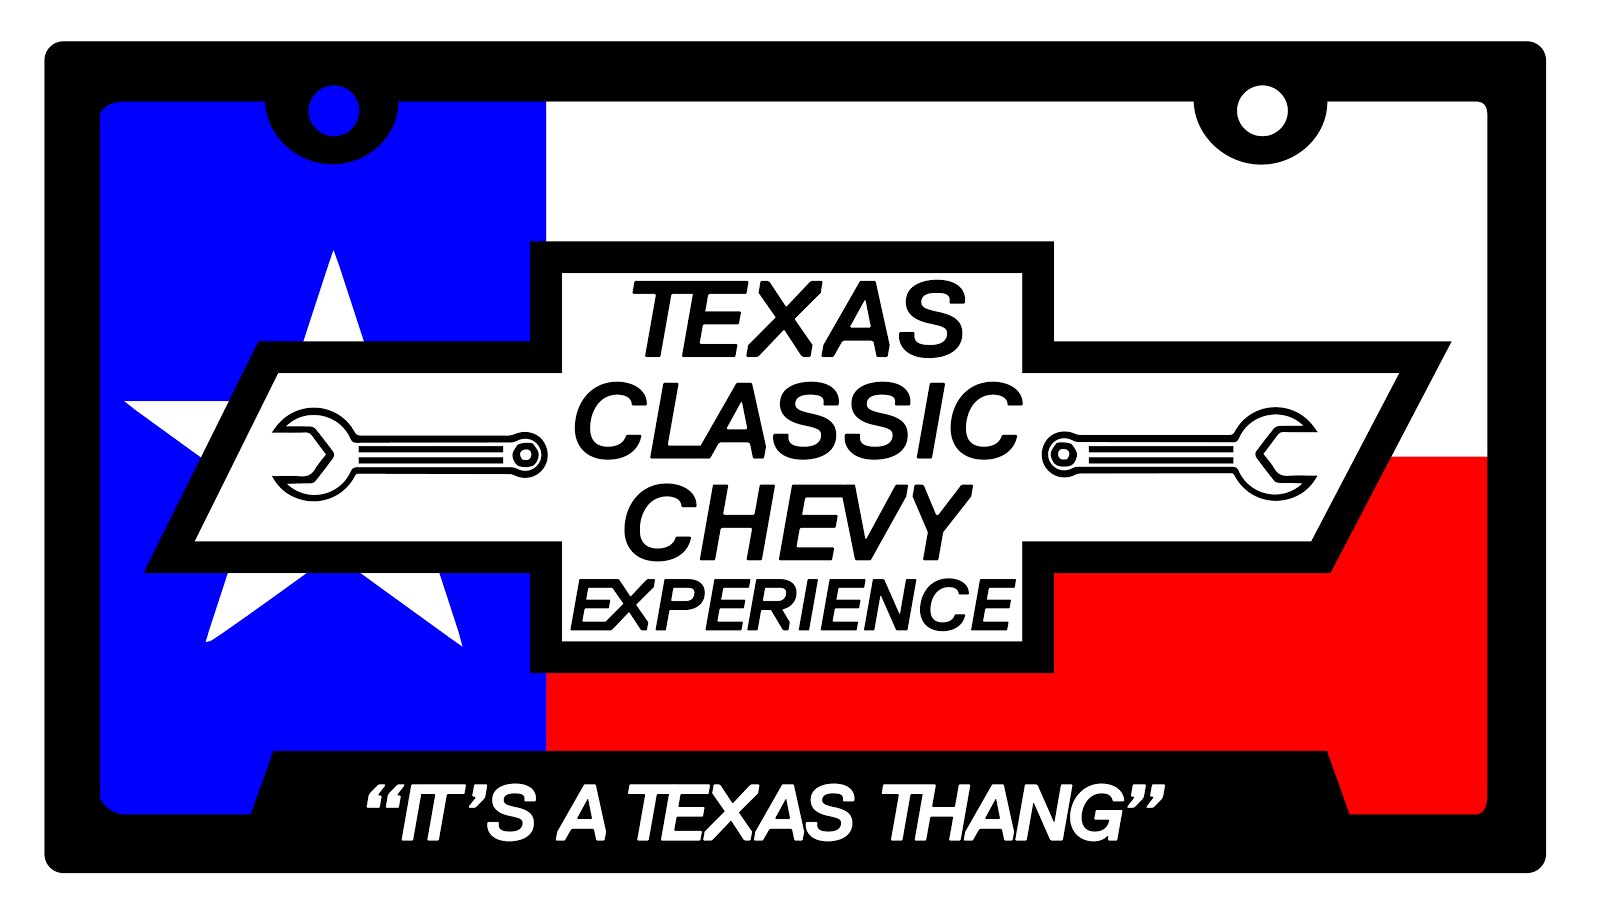 TEXAS CLASSIC CHEVY EXPERIENCE